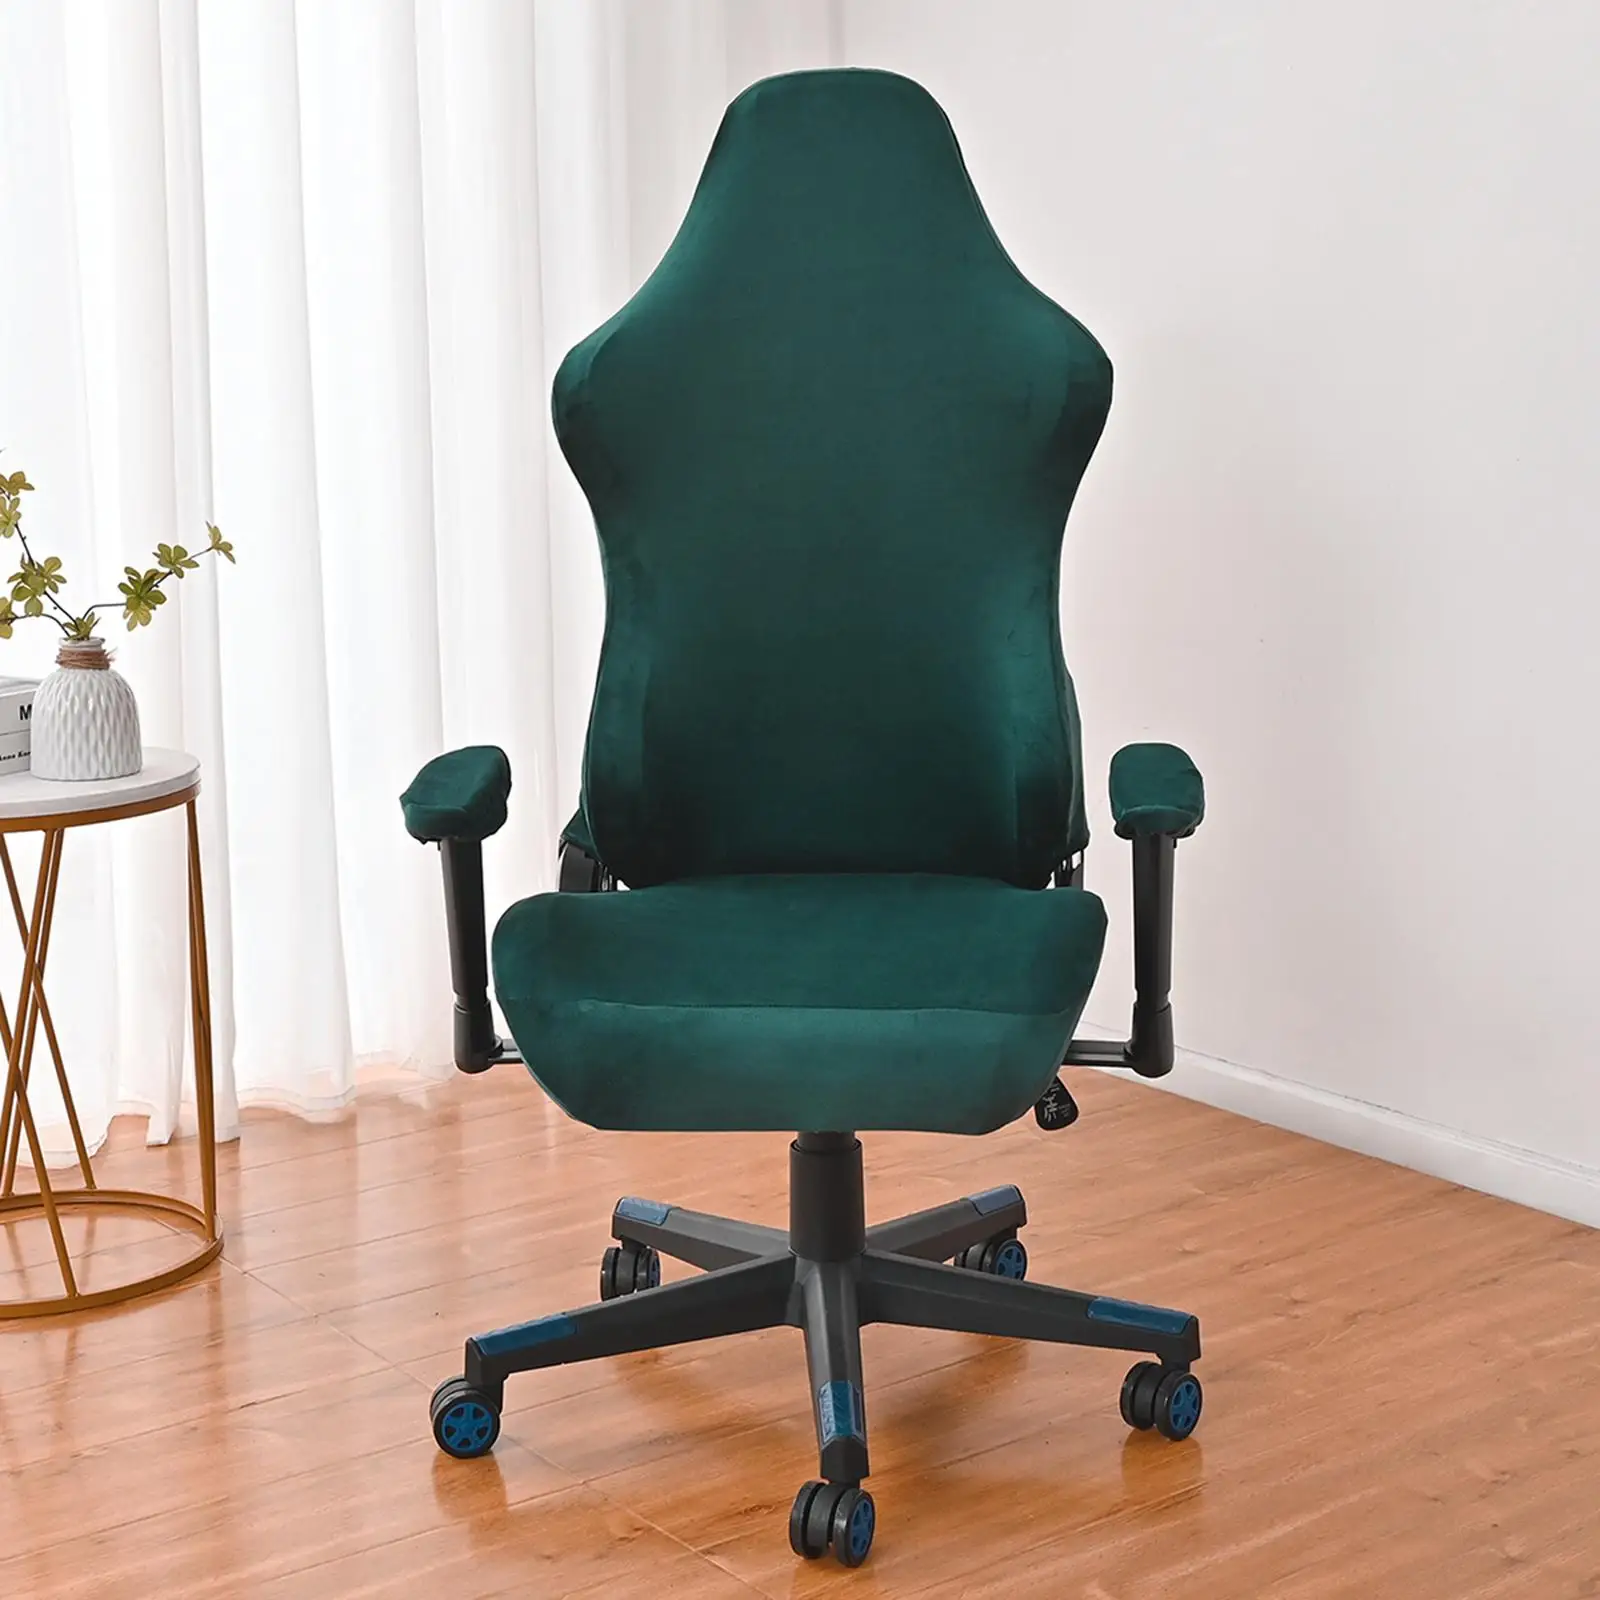 Gaming Chair Covers, Chair Covers Made of Soft Polyester, , Office Chair Slipcover for Office Swivel Chair, Computer Chair,